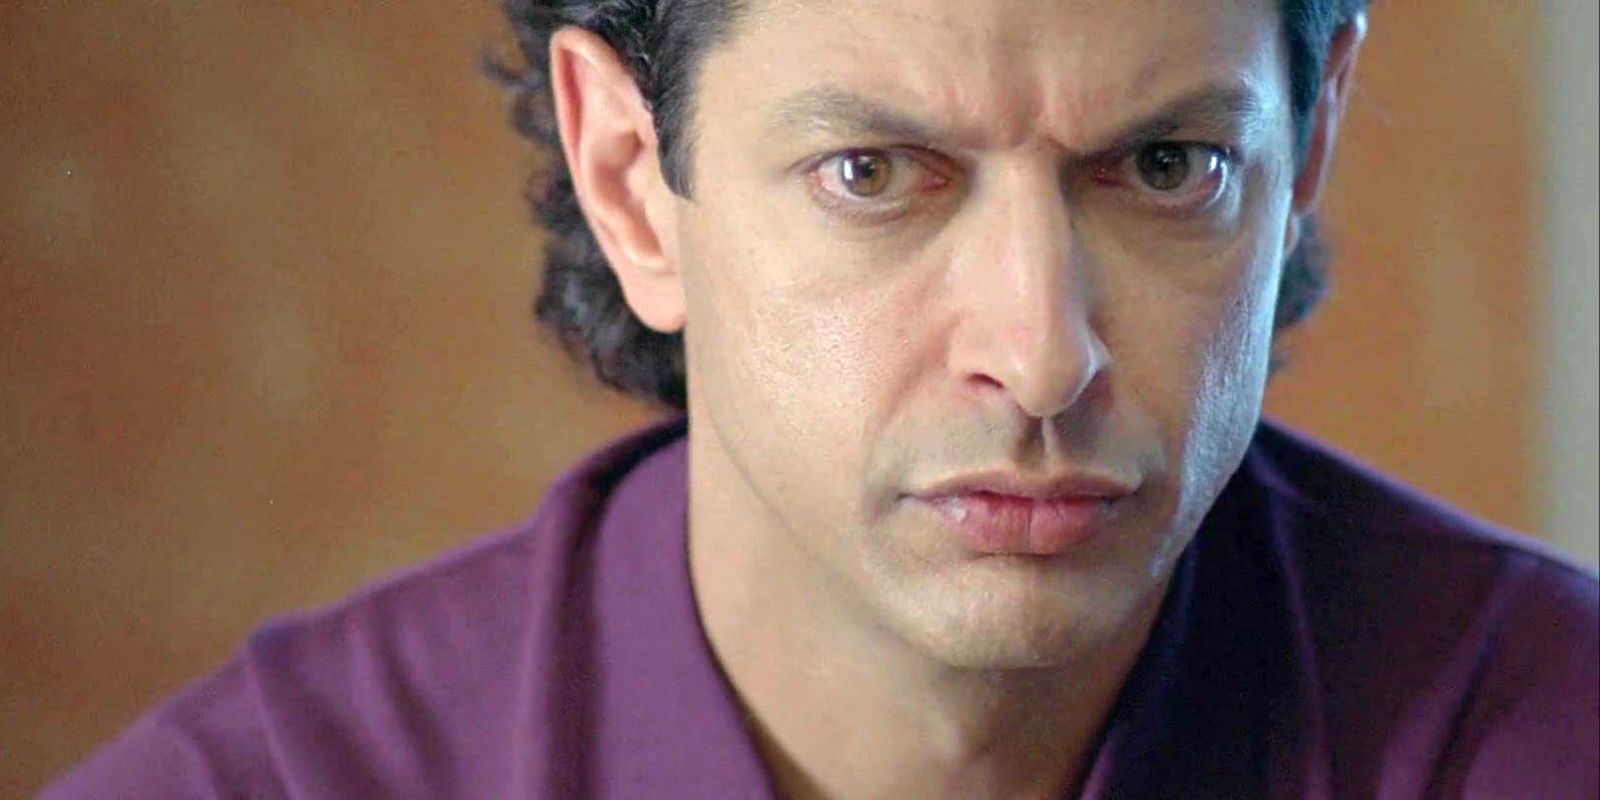 Jeff Goldblum’s Horror Movie Roles (That Aren’t The Fly)